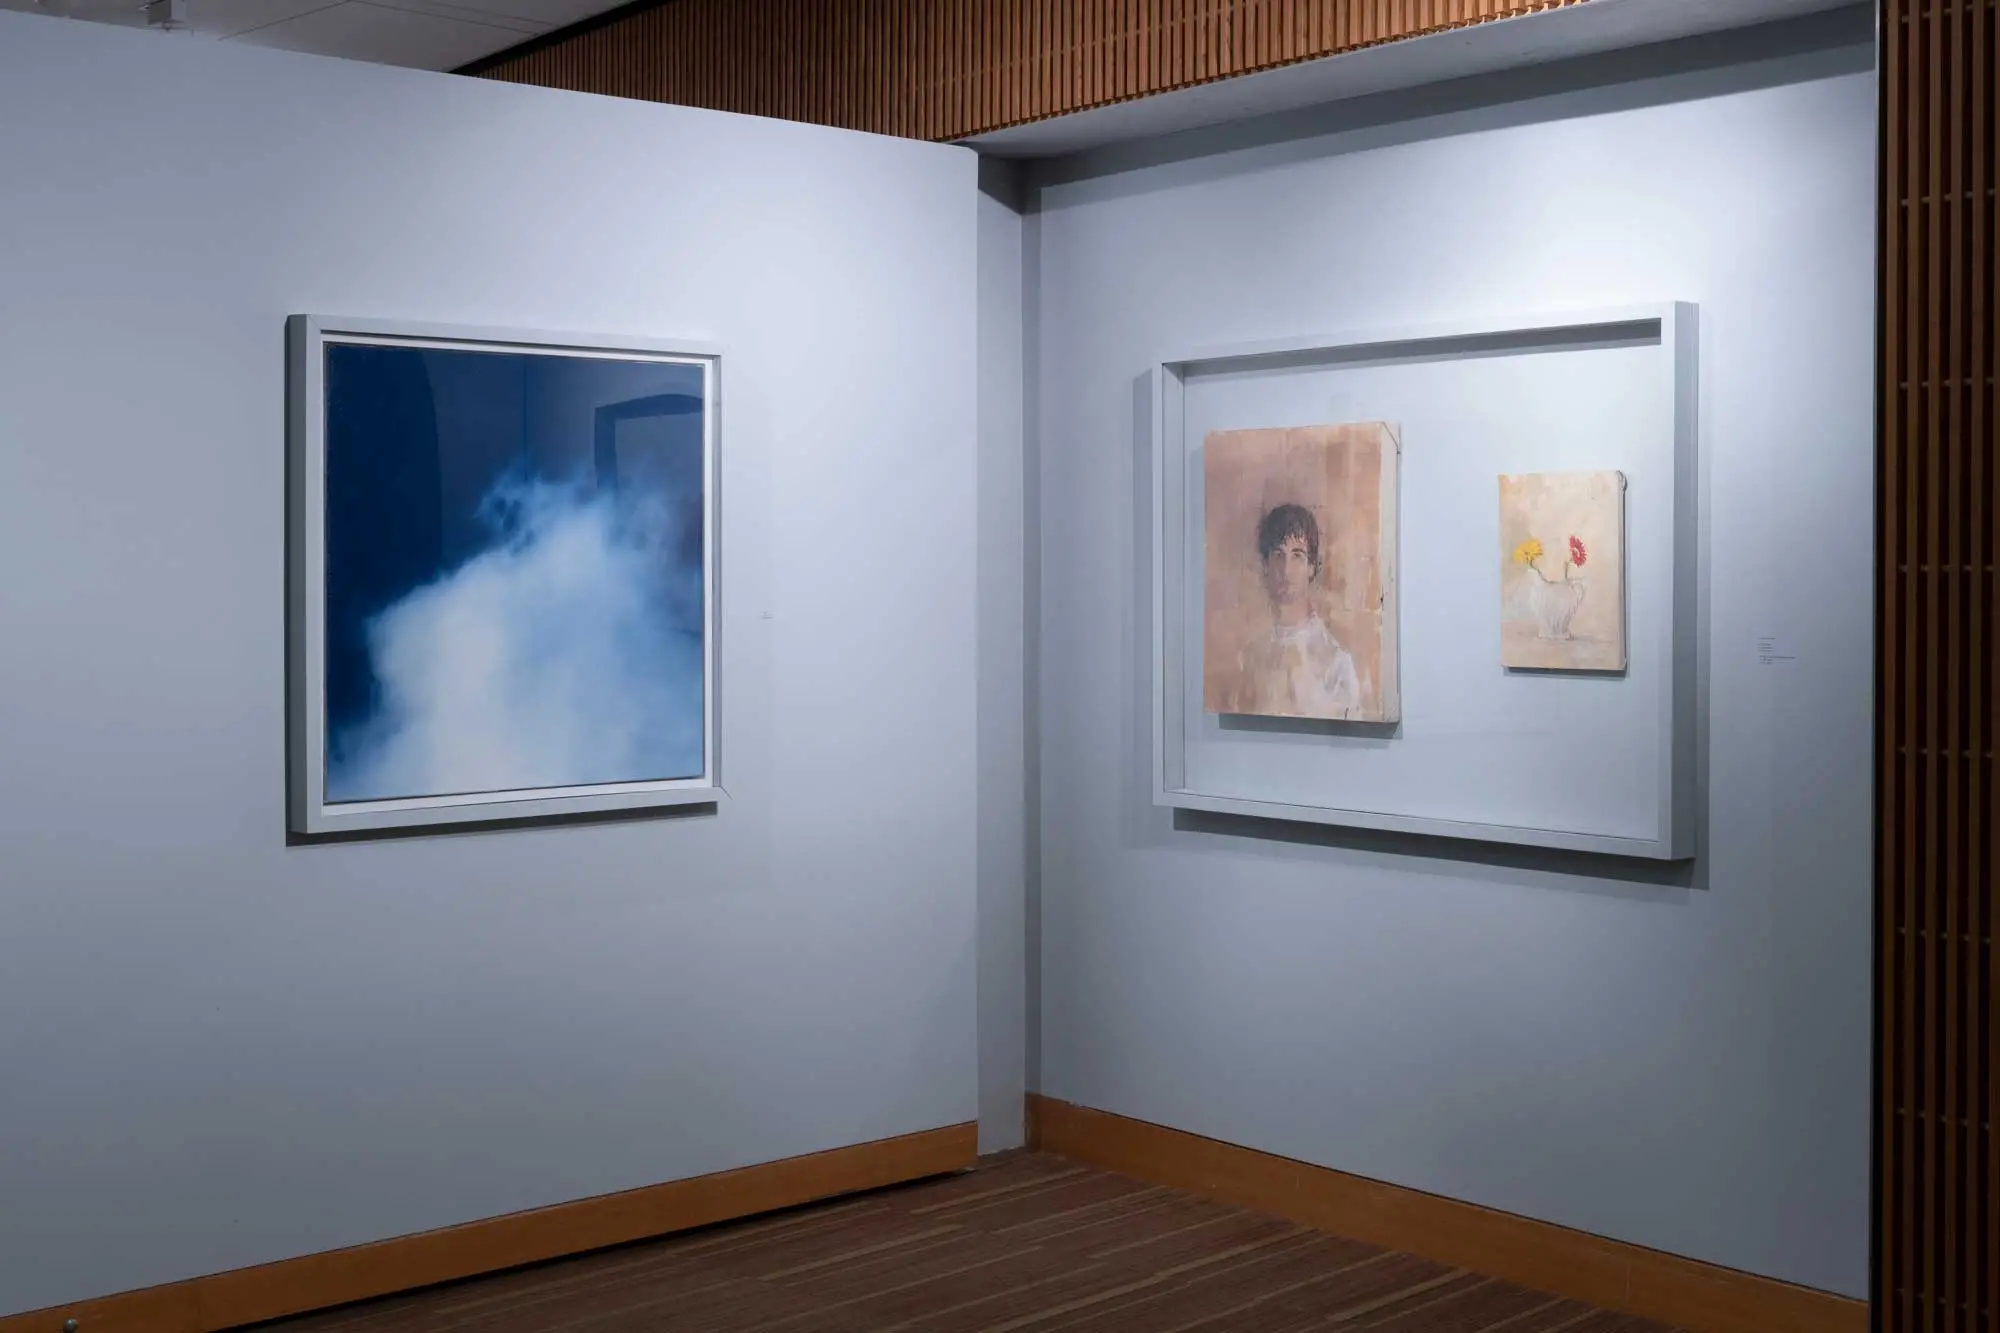 Installation view, "David Cox: What and Where Things Are", Harrison Gallery, Two walls with three paintings, cloud, self portrait, and still life with two flowers